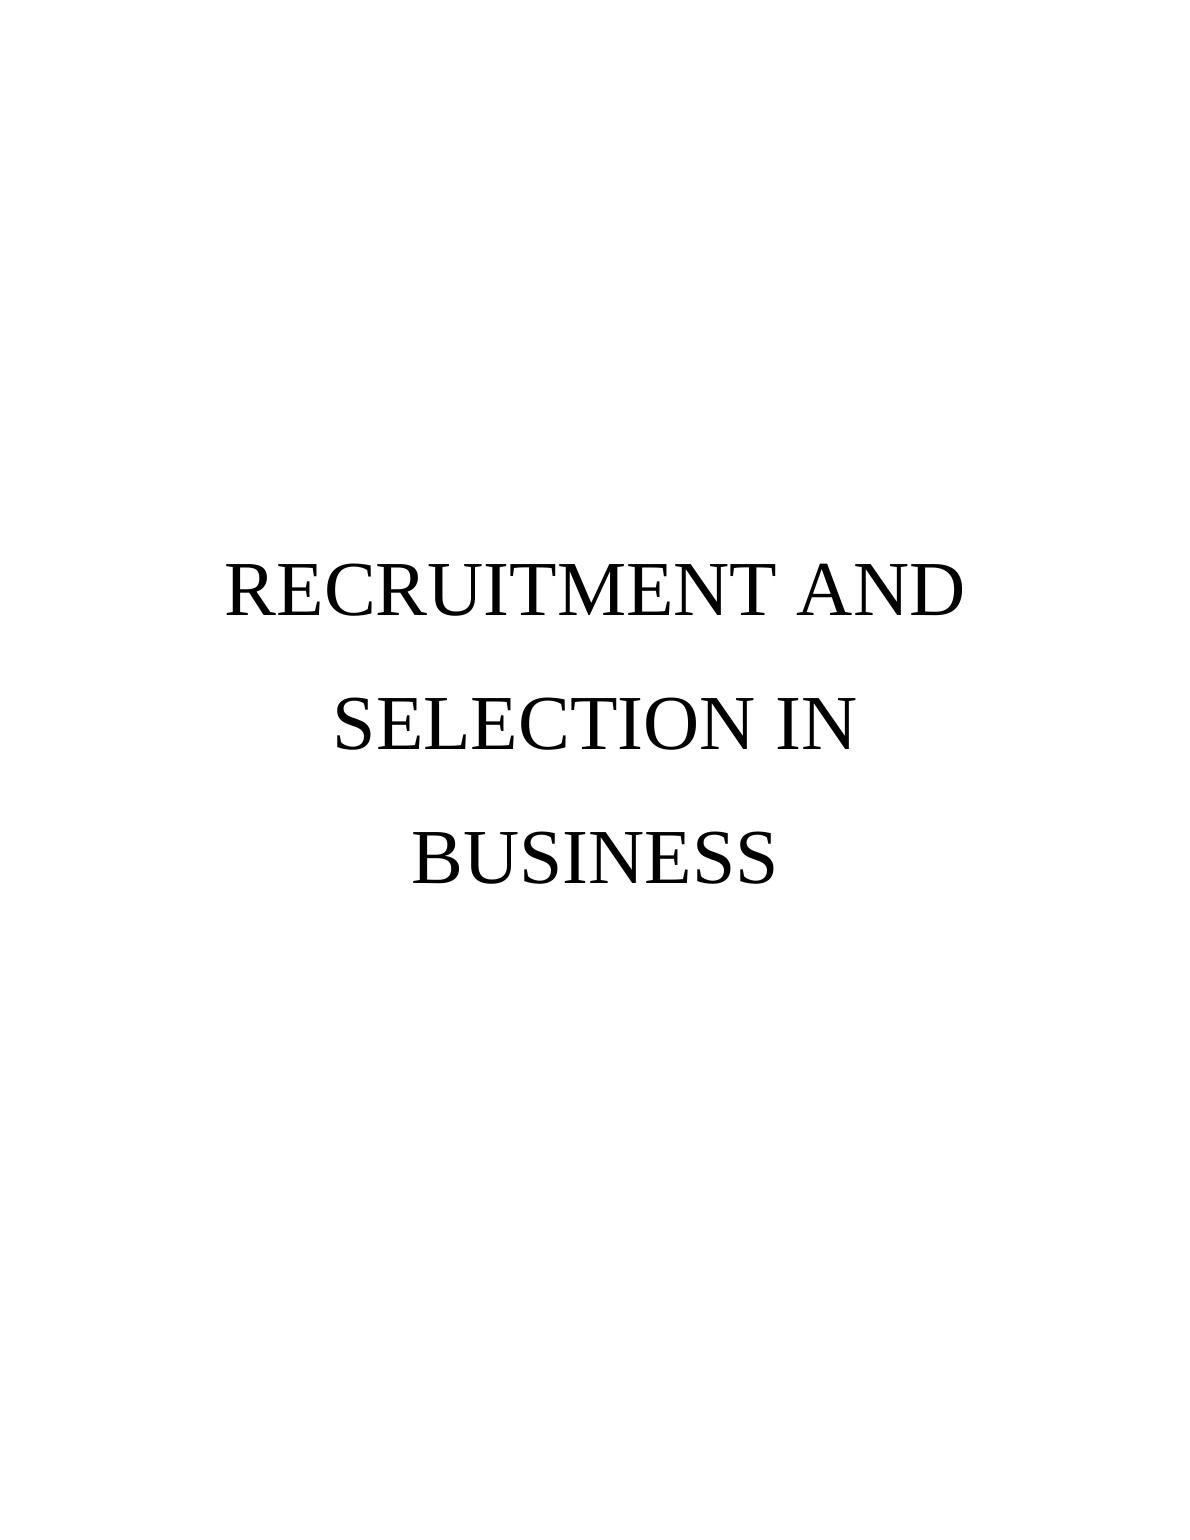 Unit 13 Recruitment and Selection in Business : Assignment_1